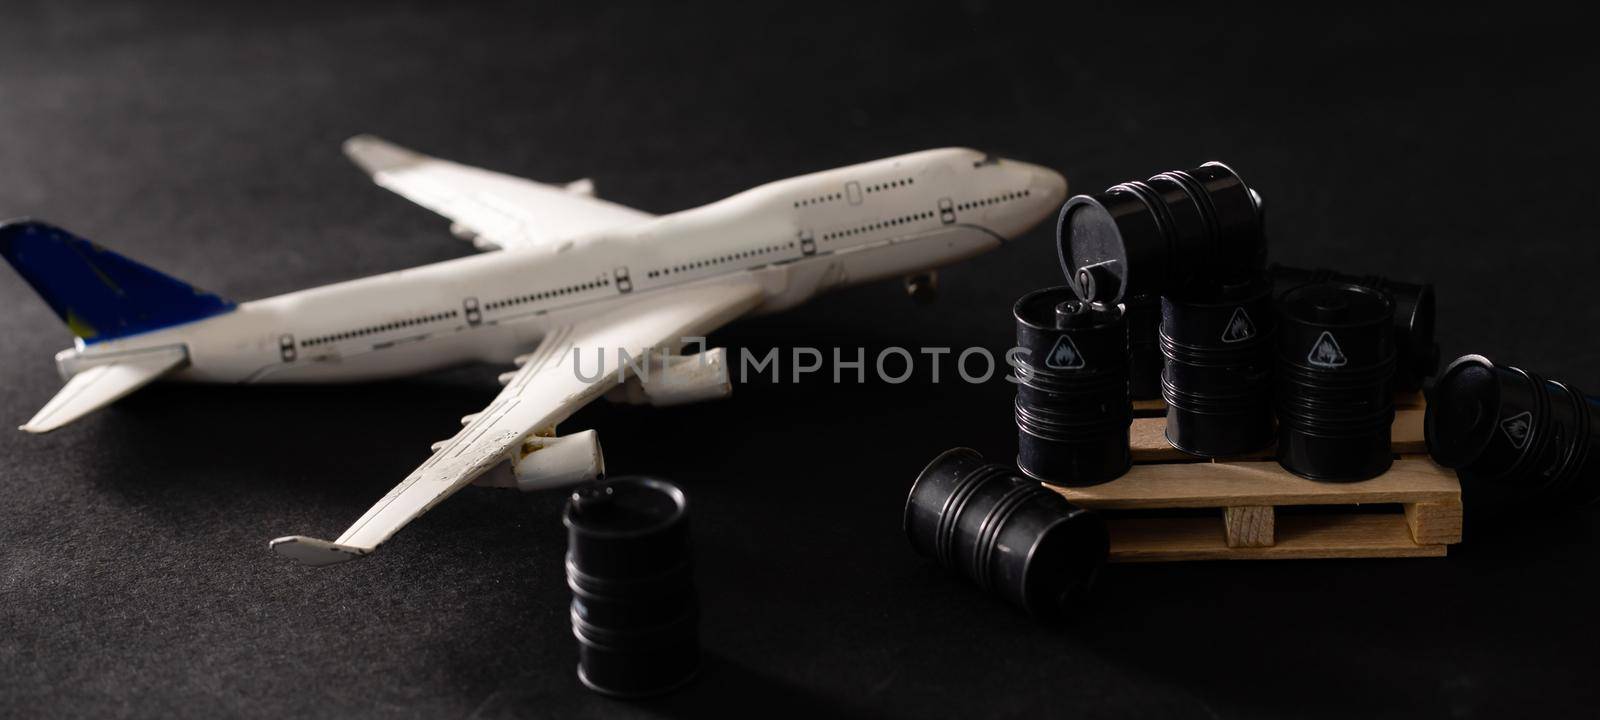 Miniature toy barrels and airplane. Business and finance concept